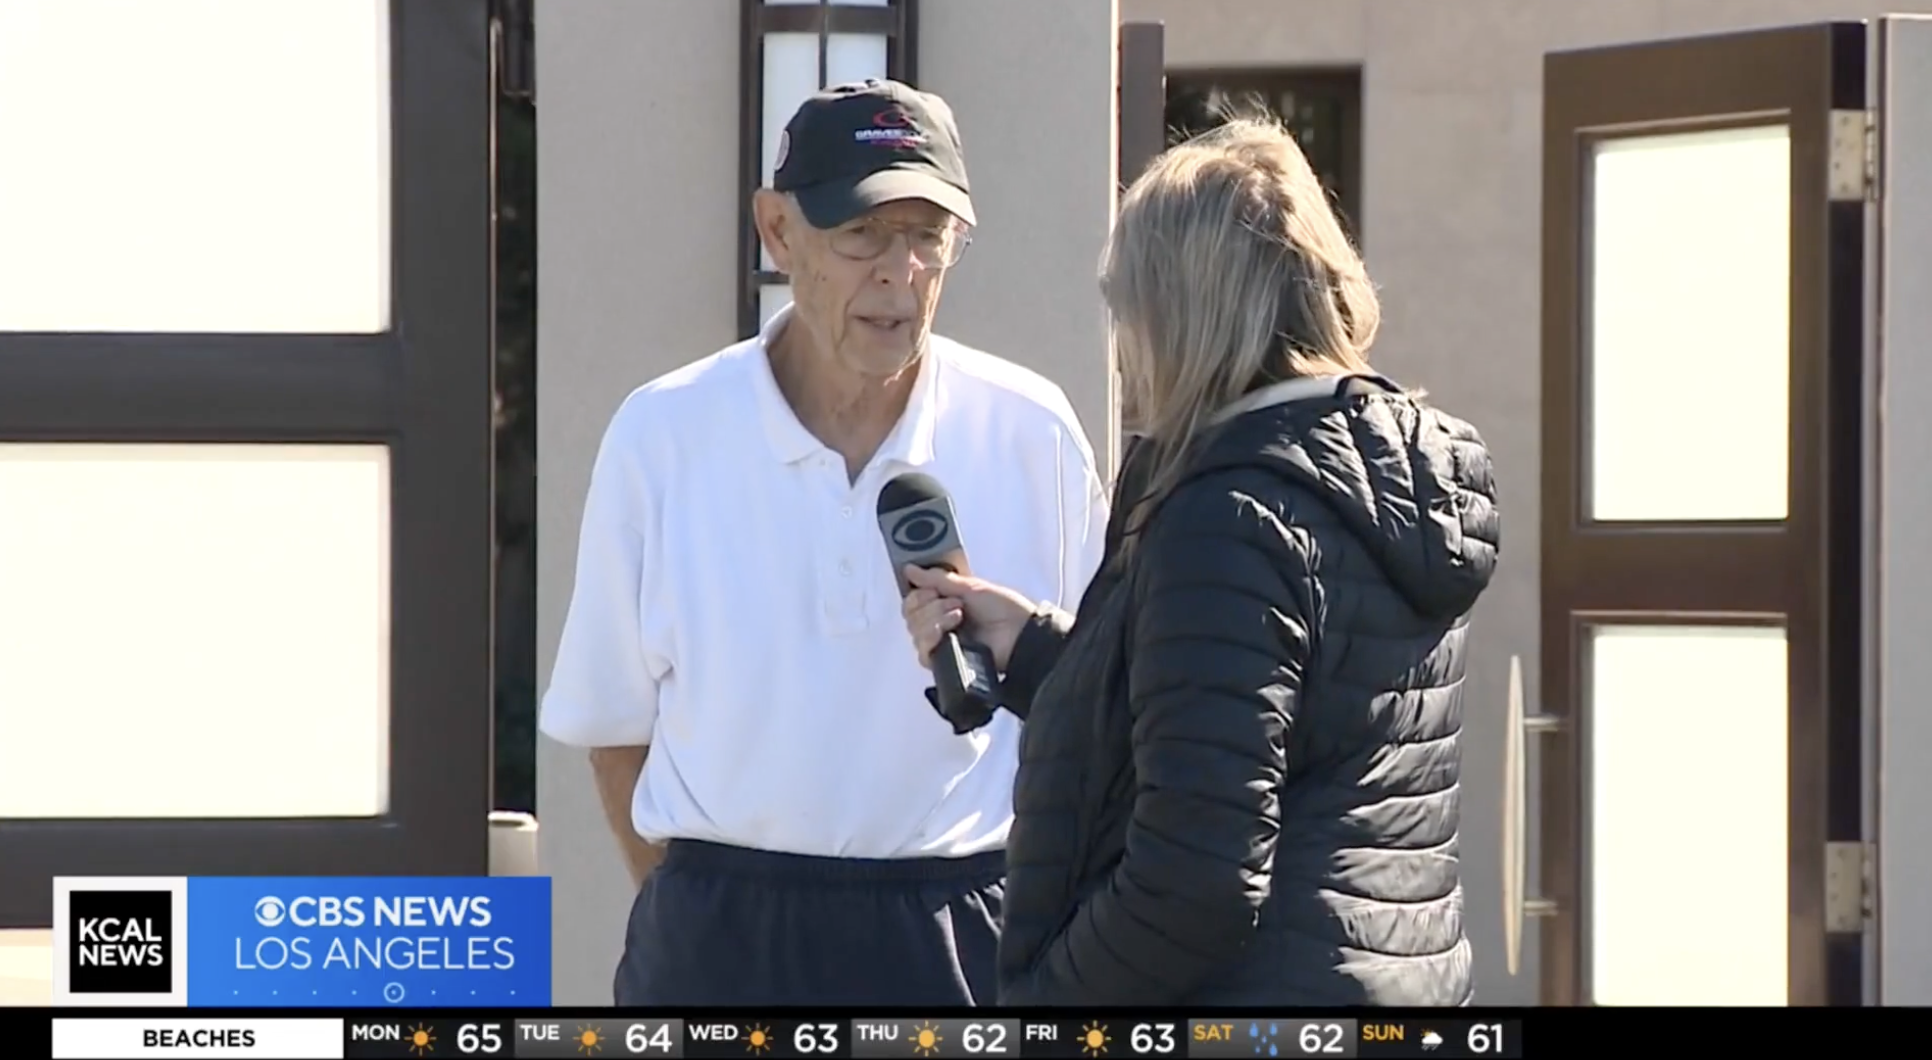 Older man wearing a cap being interviewed by a reporter outdoors, with KCAL News logo on the screen